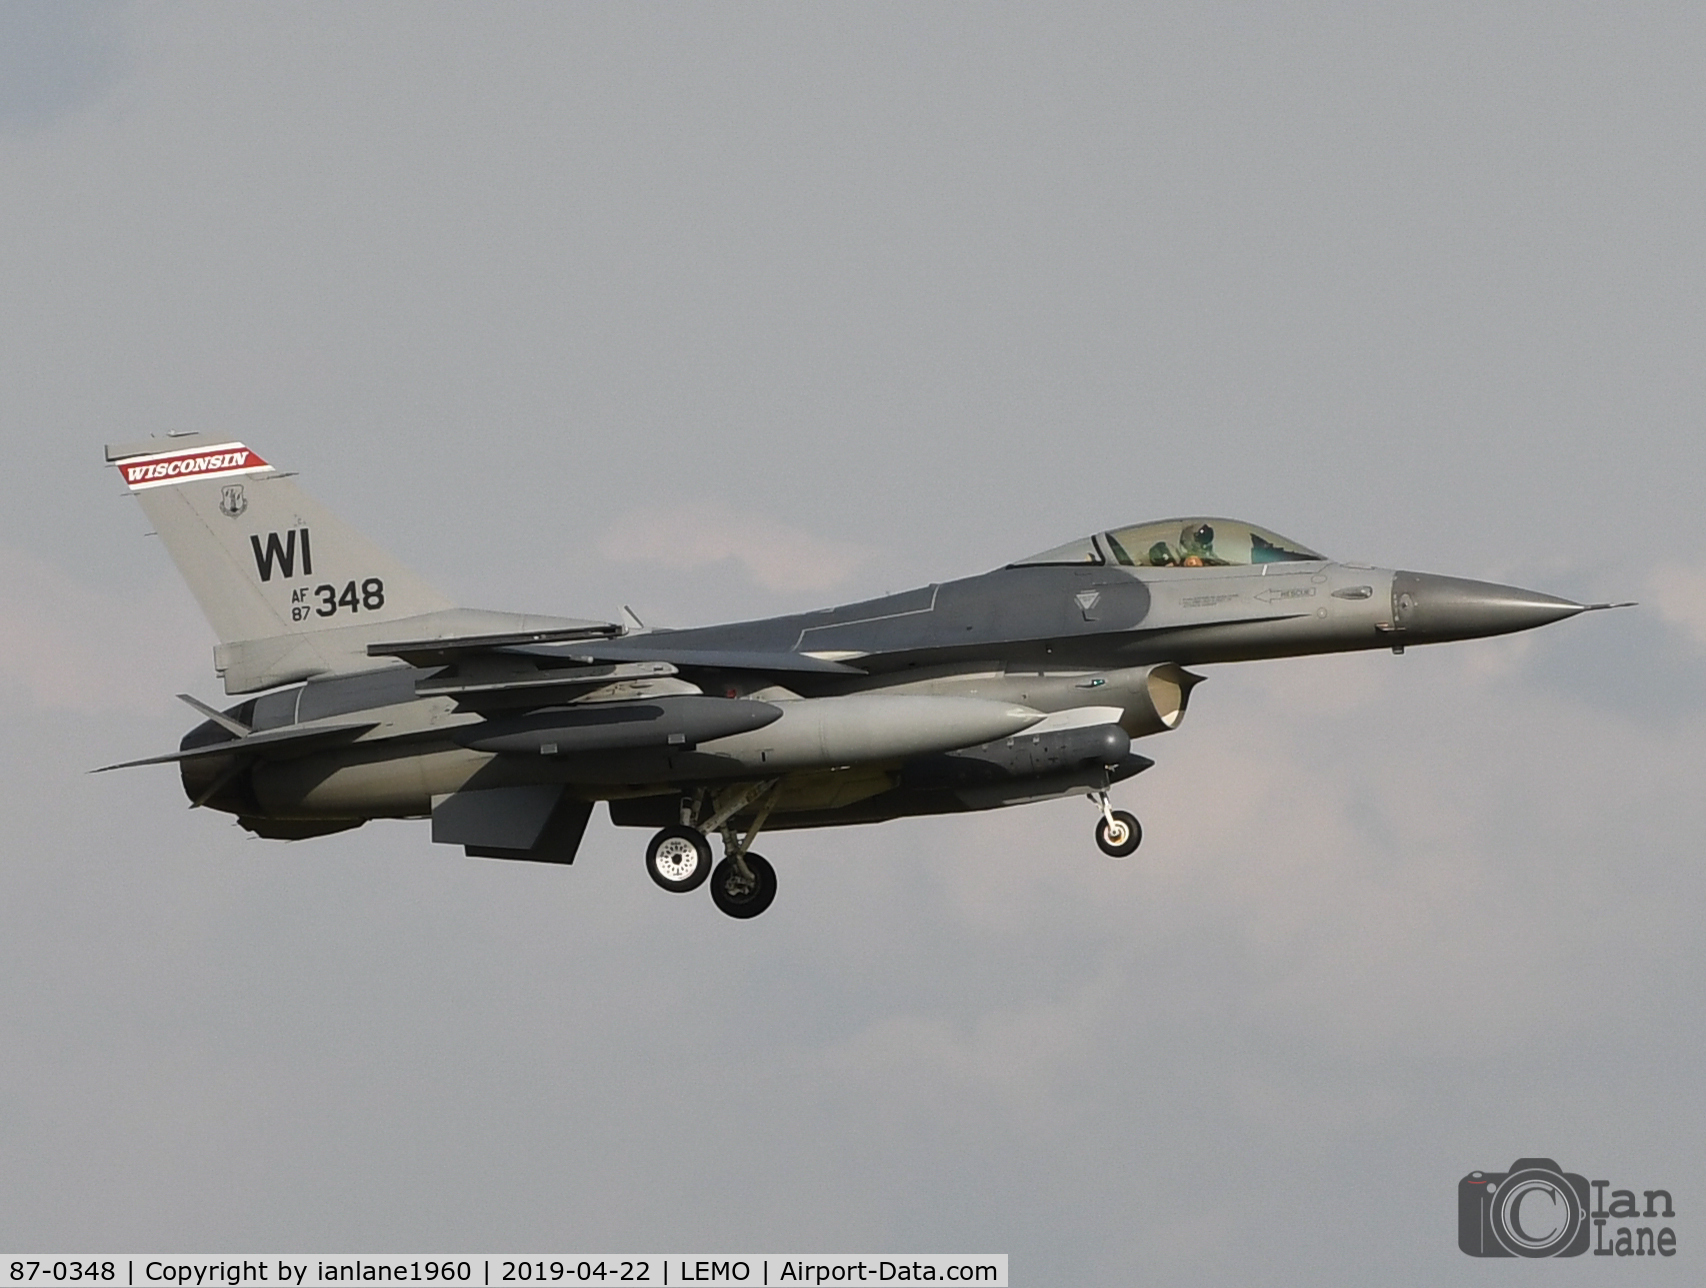 87-0348, 1987 General Dynamics F-16C Fighting Falcon C/N 5C-609, F16C from Wisconsin ANG at Moron Air Base, Spain